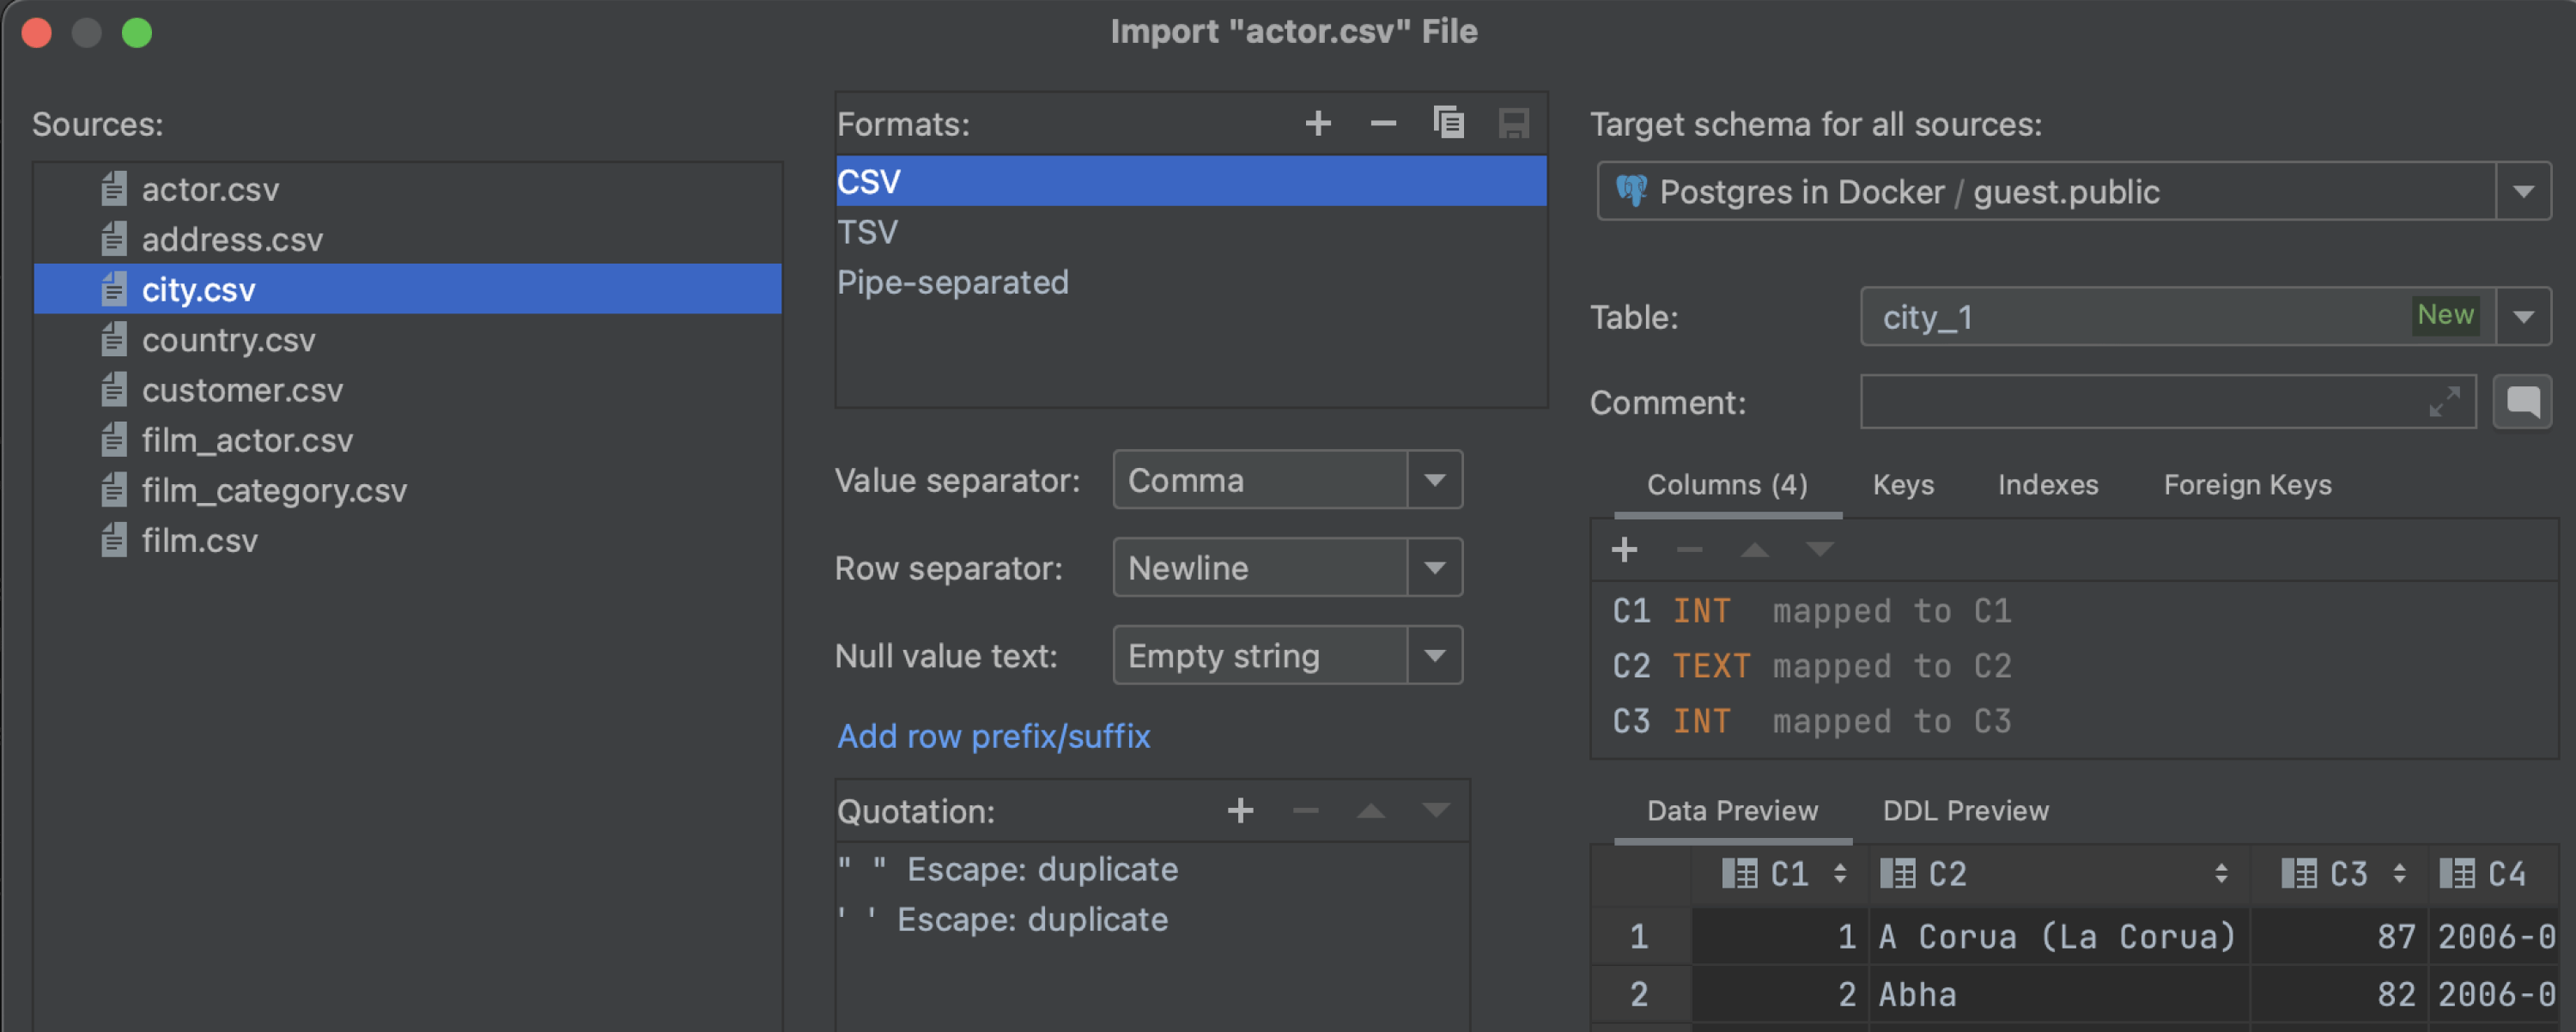 Option to import multiple CSV files